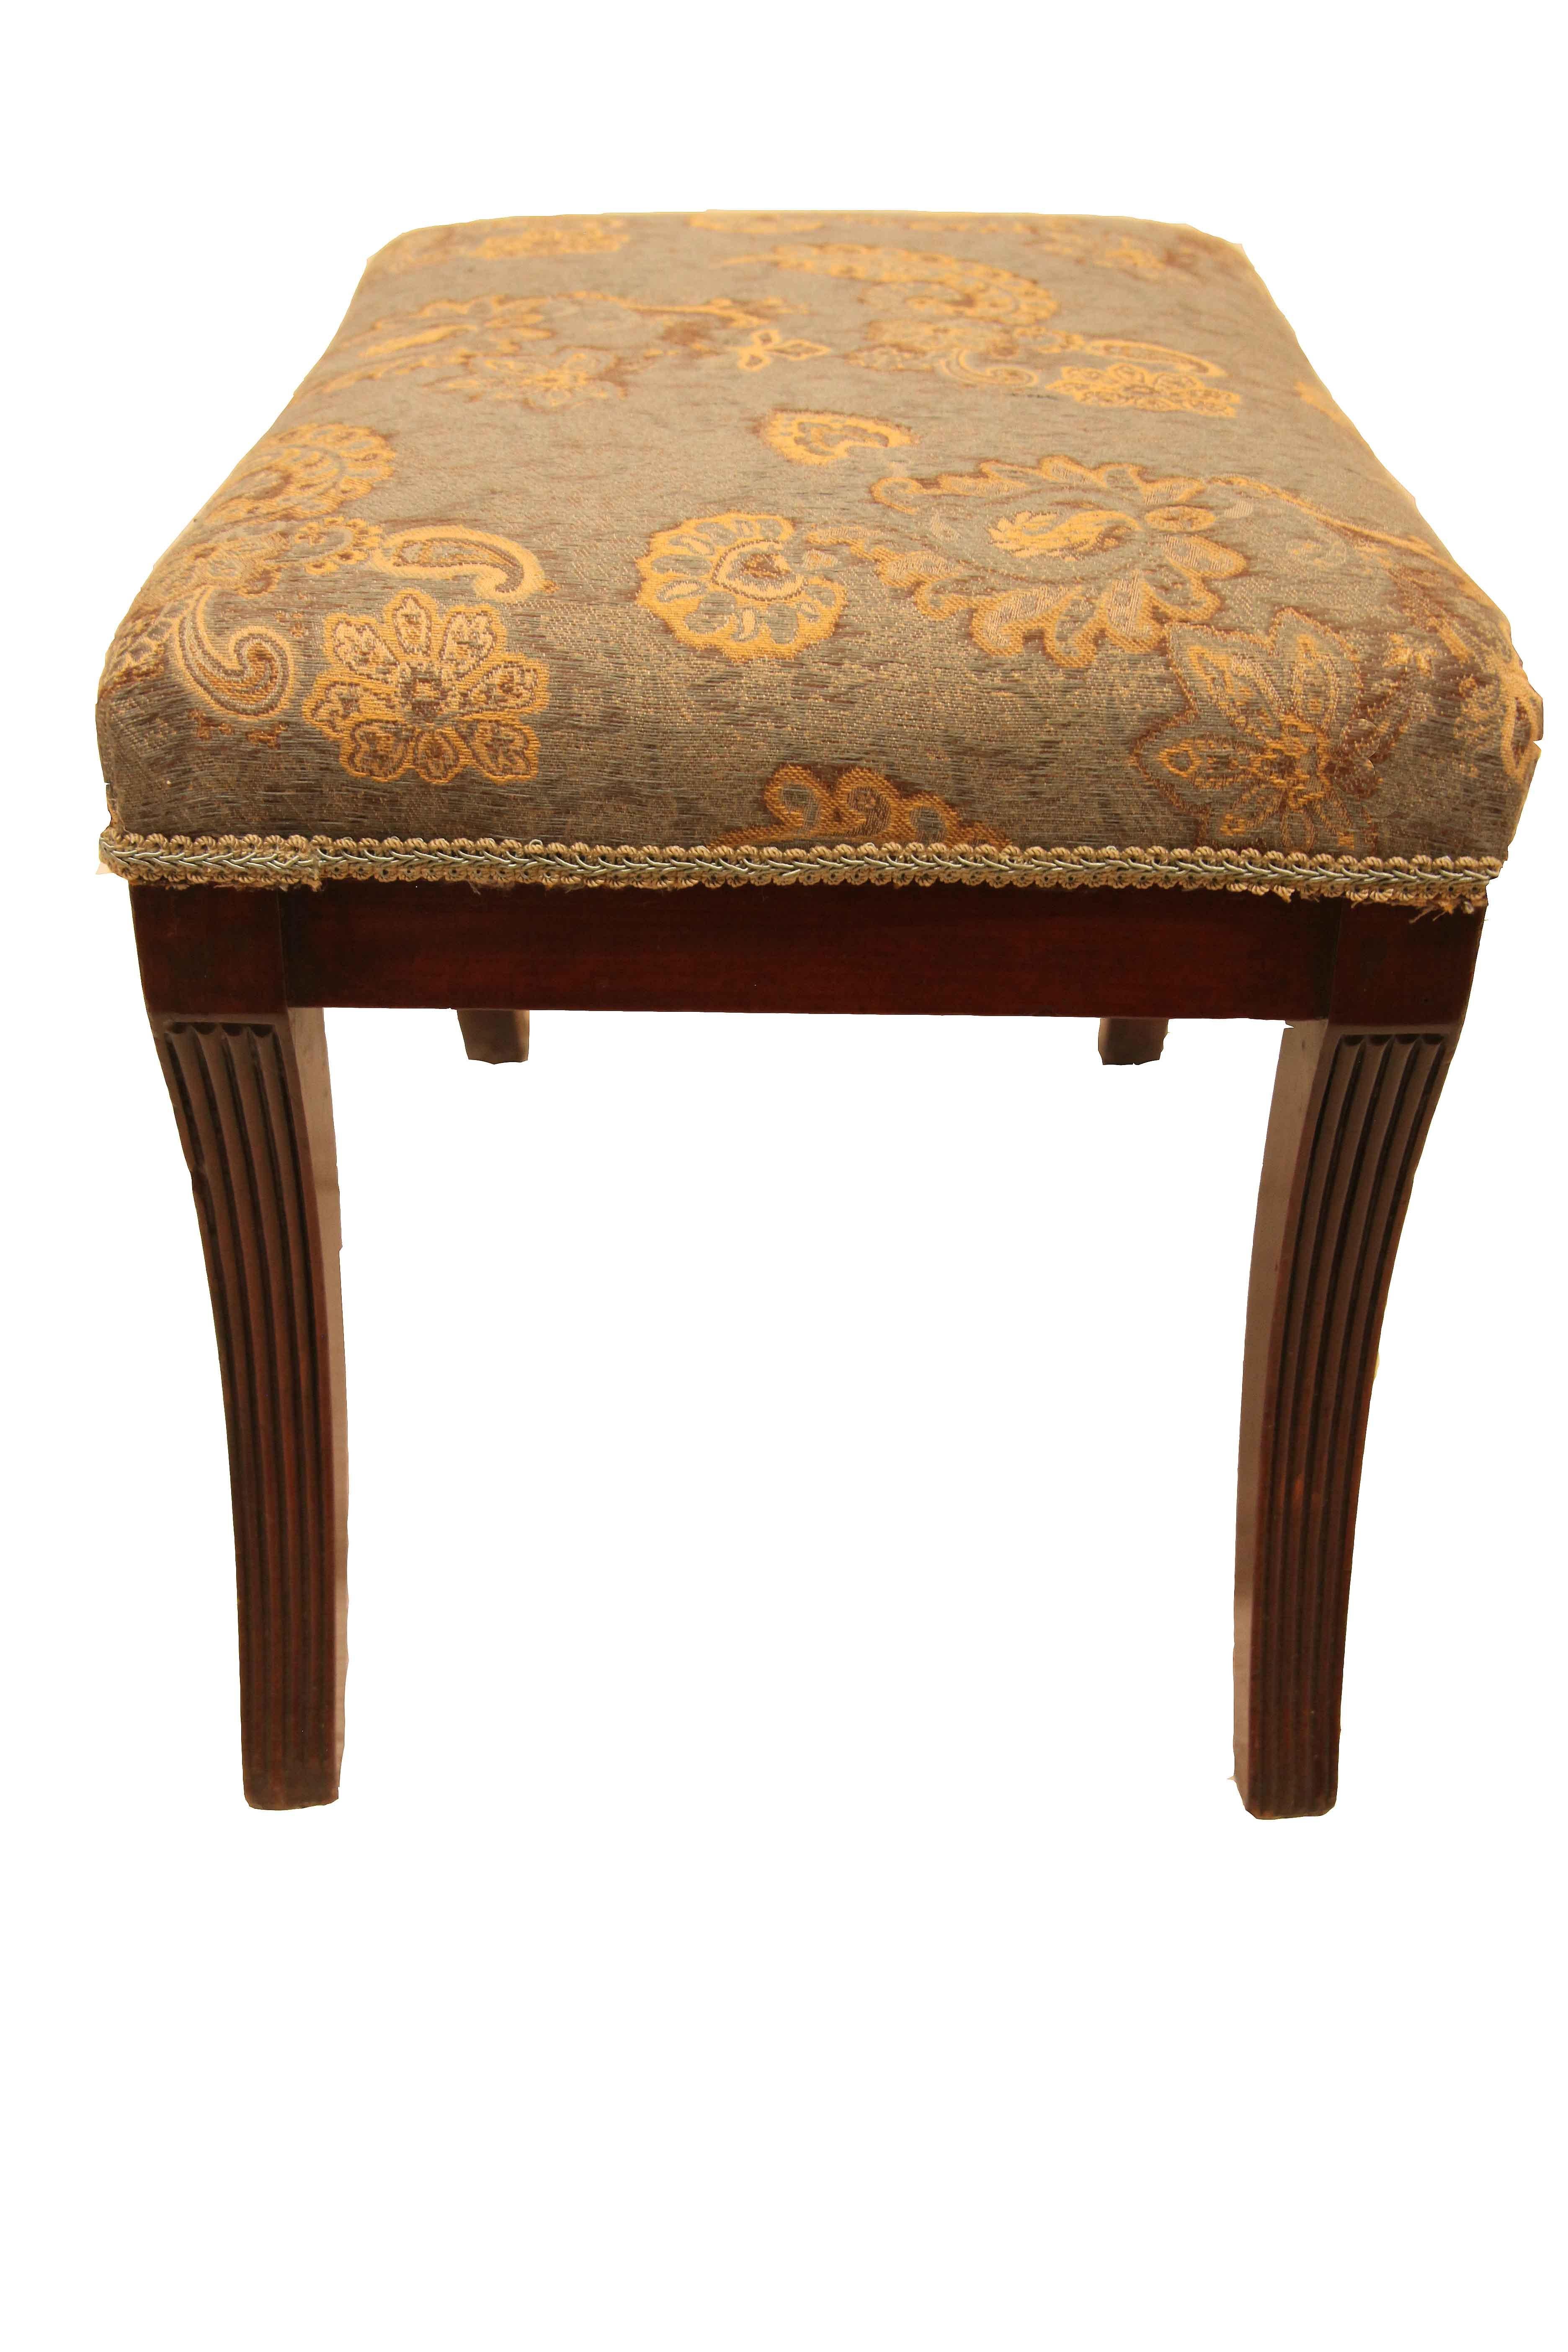 English Regency Foot Stool For Sale